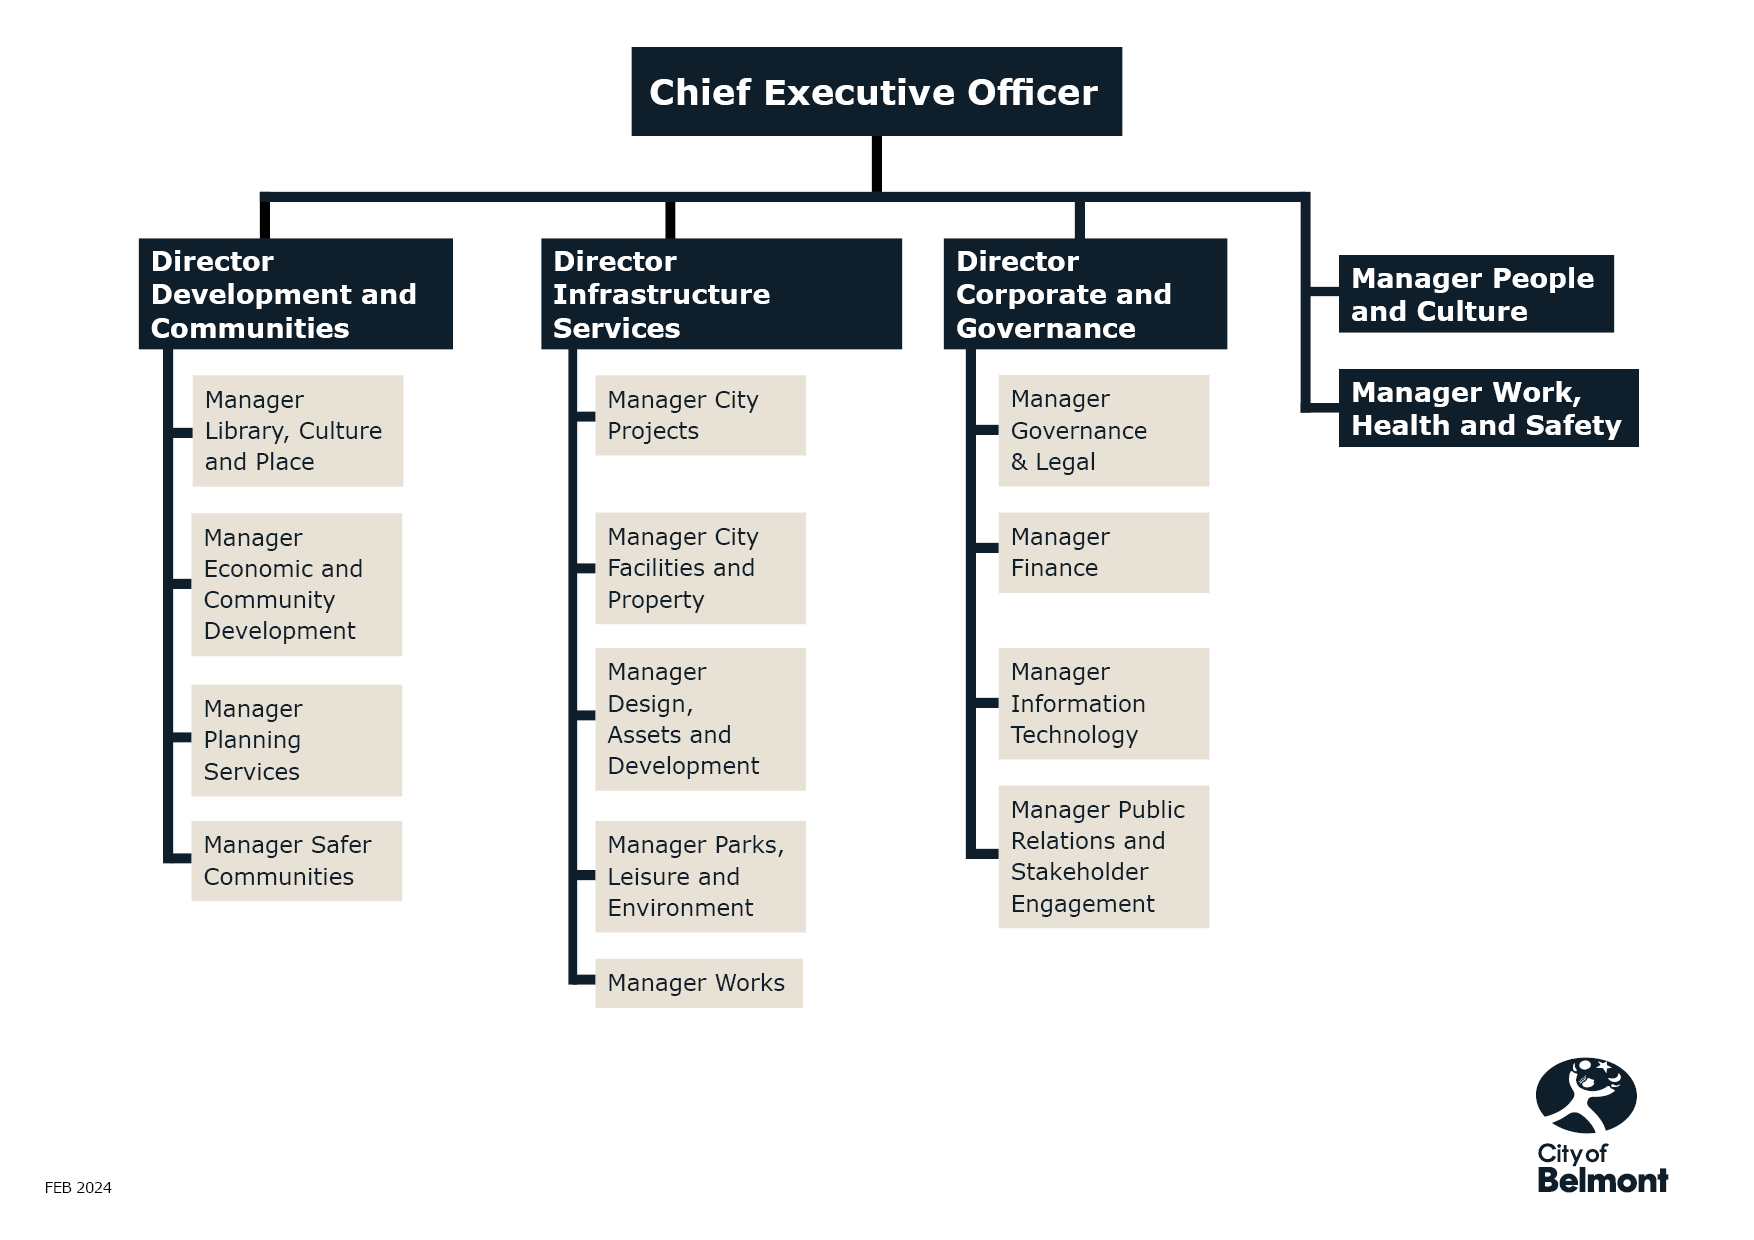 City of Belmont organisational structure chart.